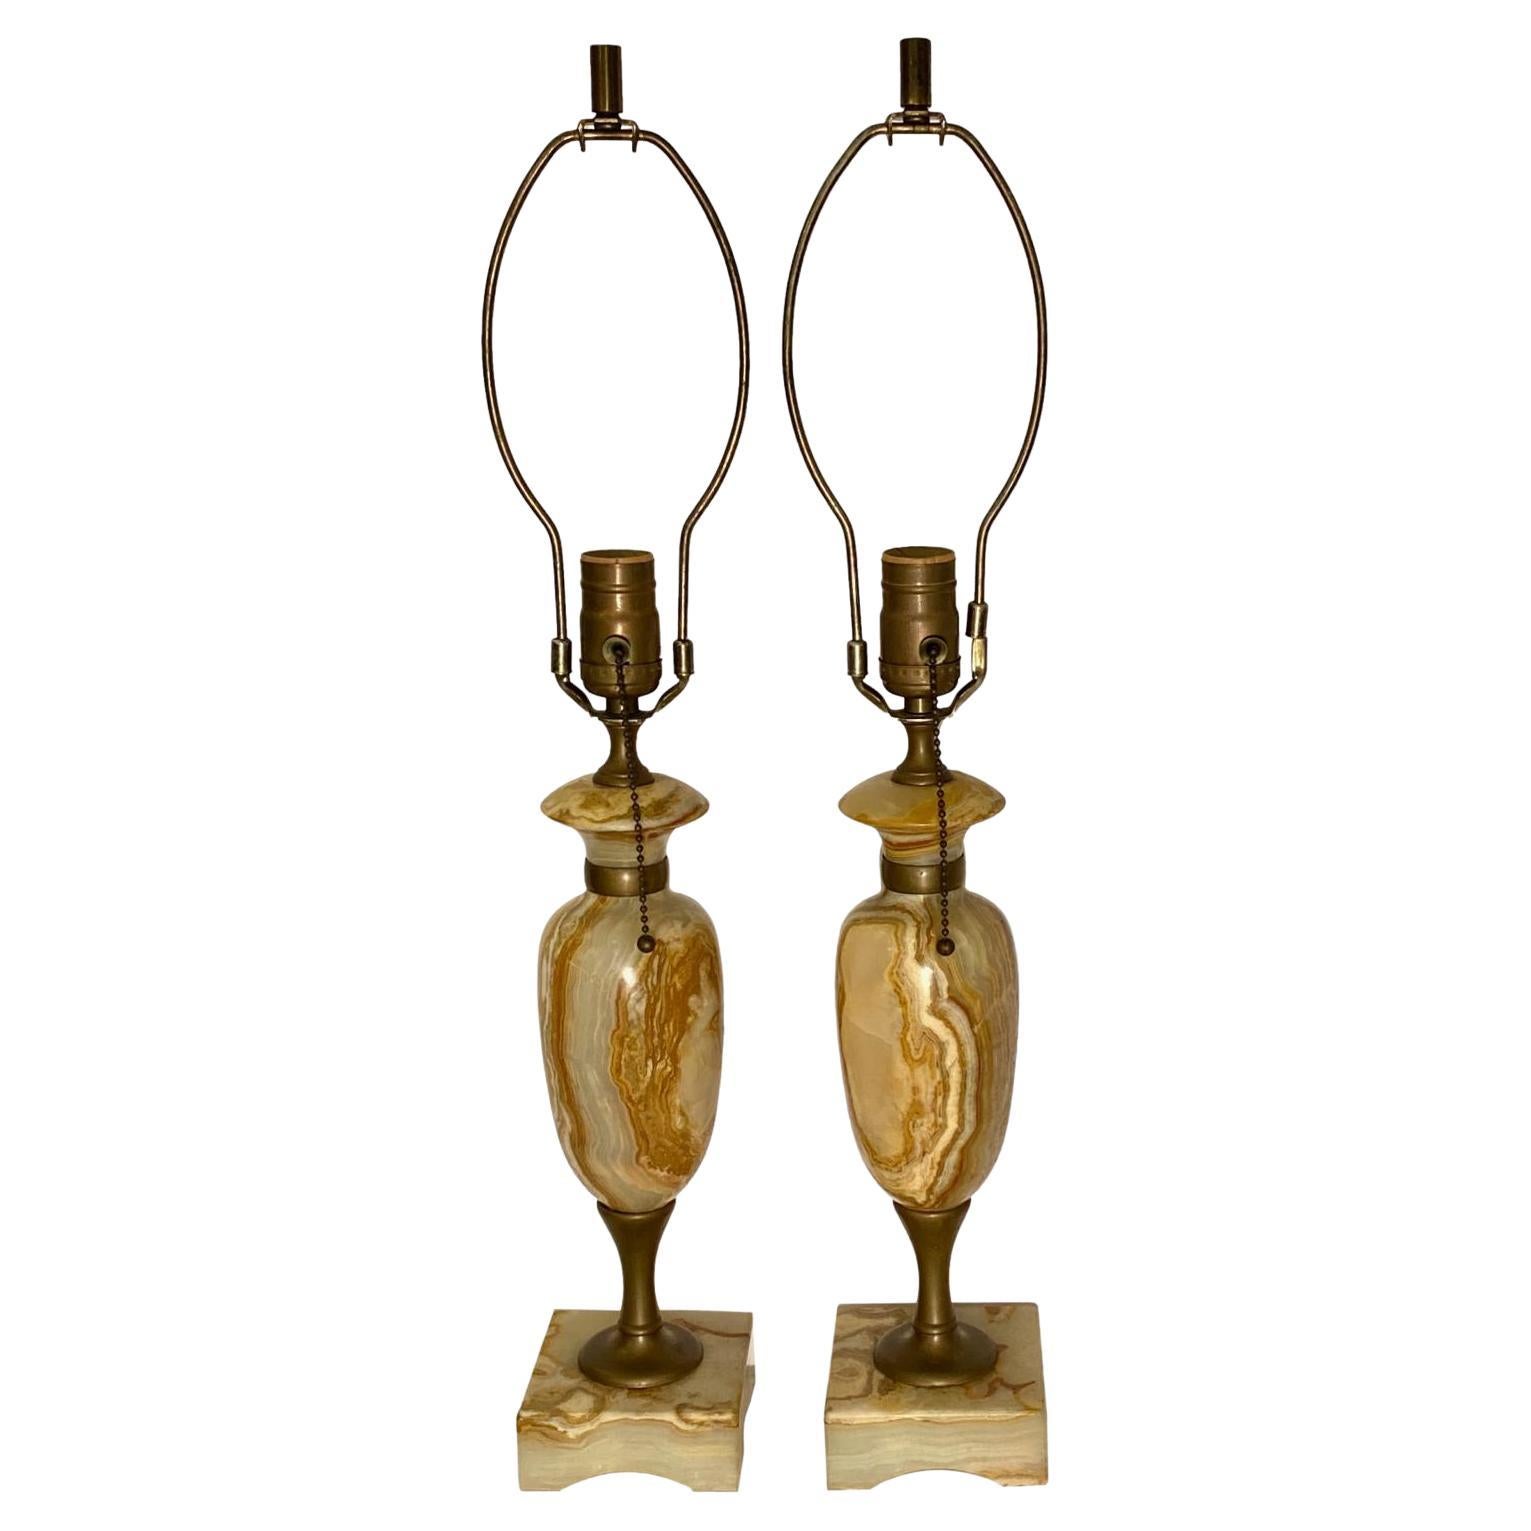 Pair of Onyx and Bronze Lamps